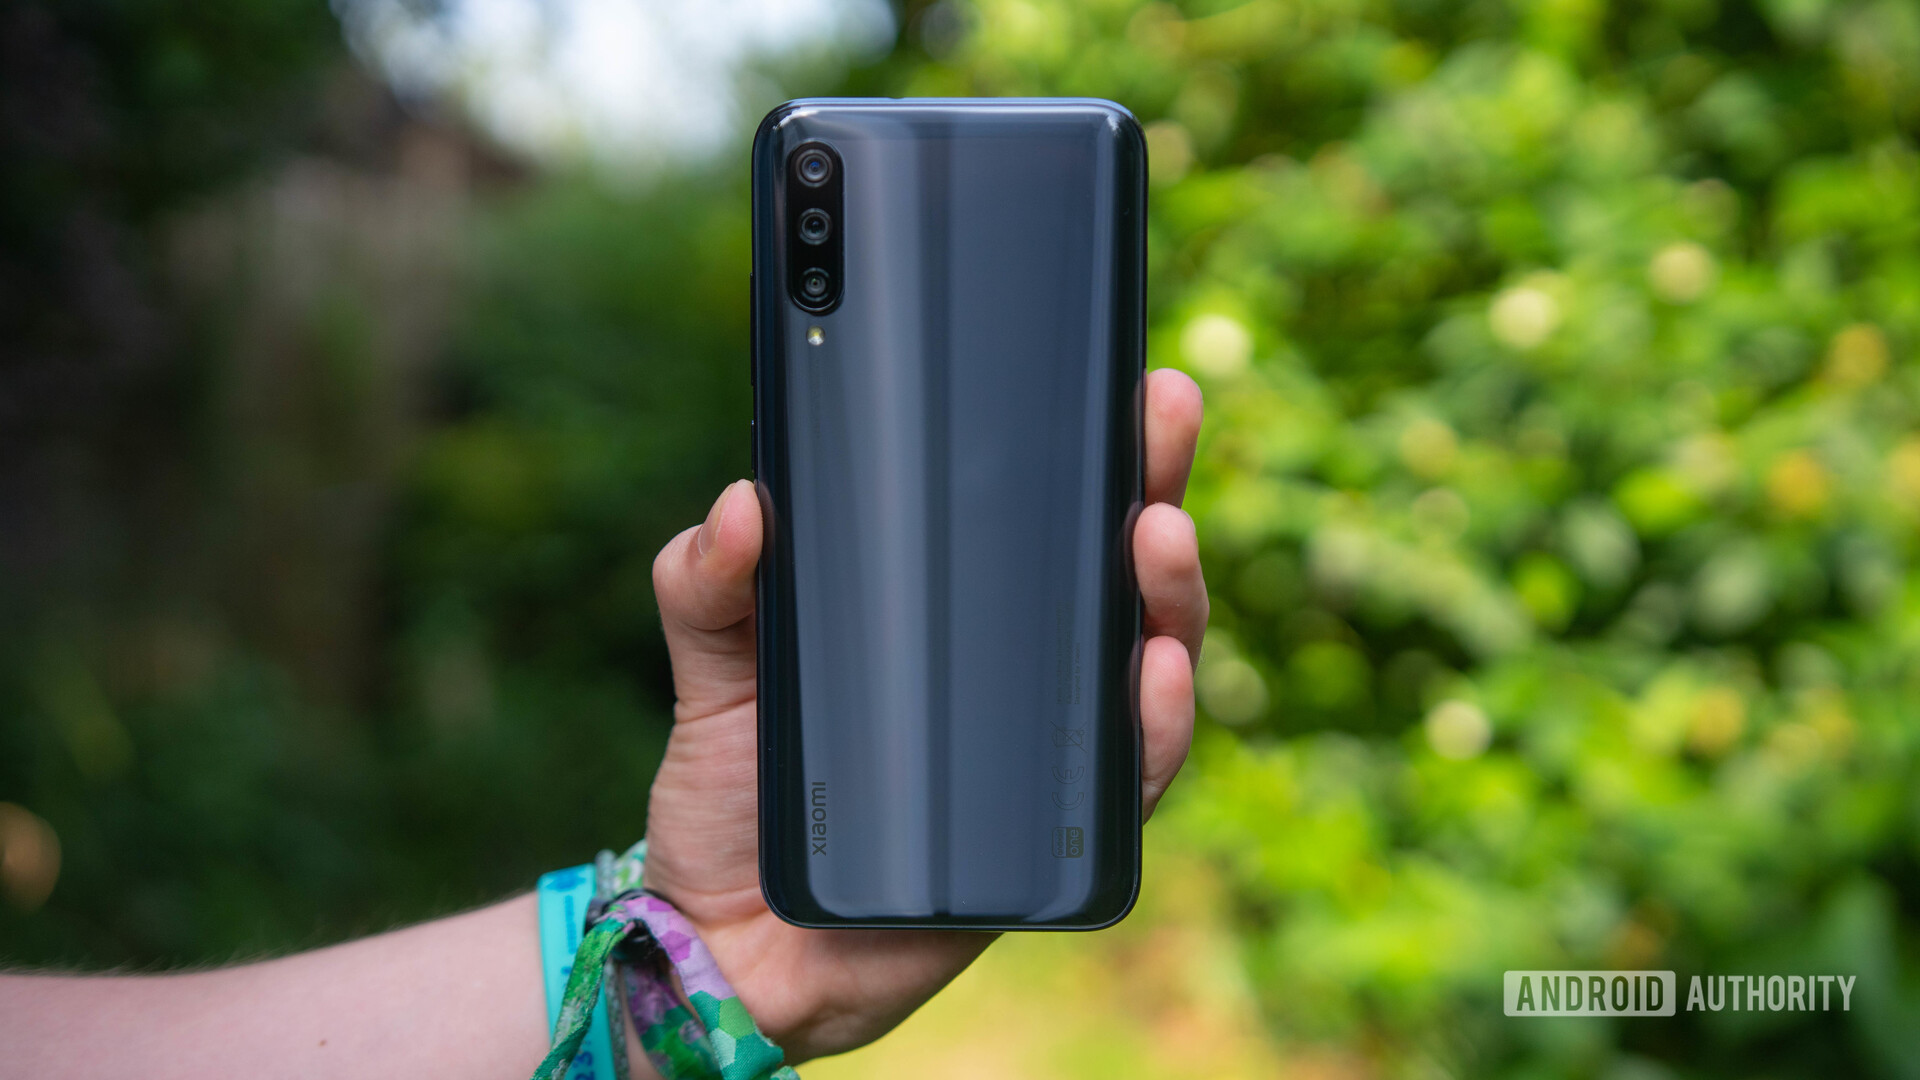 Xiaomi Mi A3 Chassis rear view in hand centered